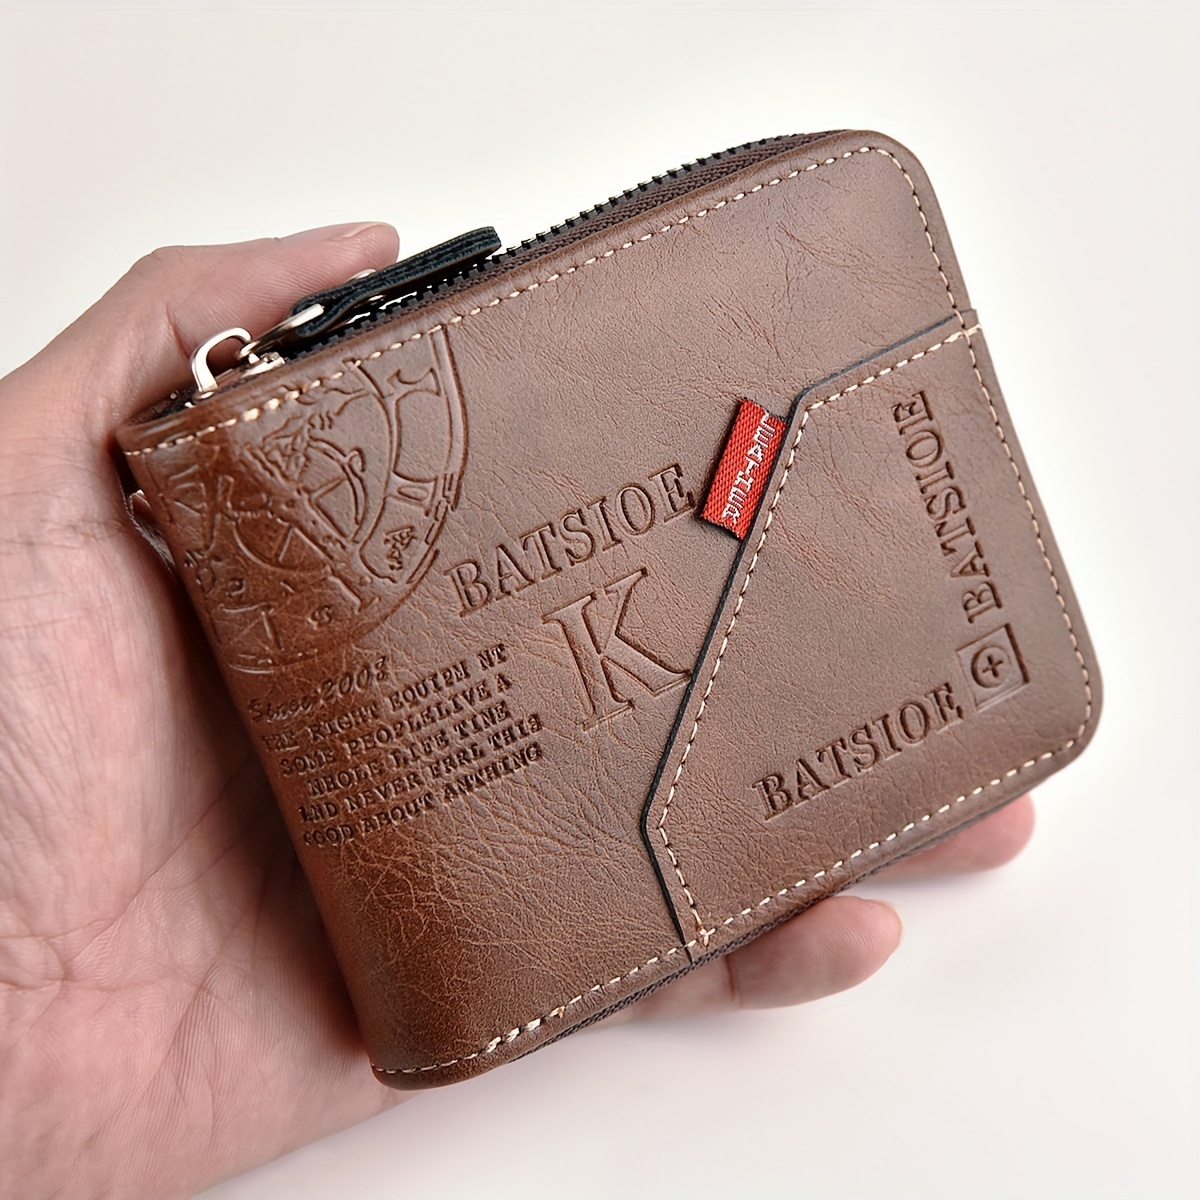 

Vintage-inspired Men's Pu Leather Wallet With Embossed Letters & Multiple Credit Card Slots - Perfect Gift For Stylish Gentlemen